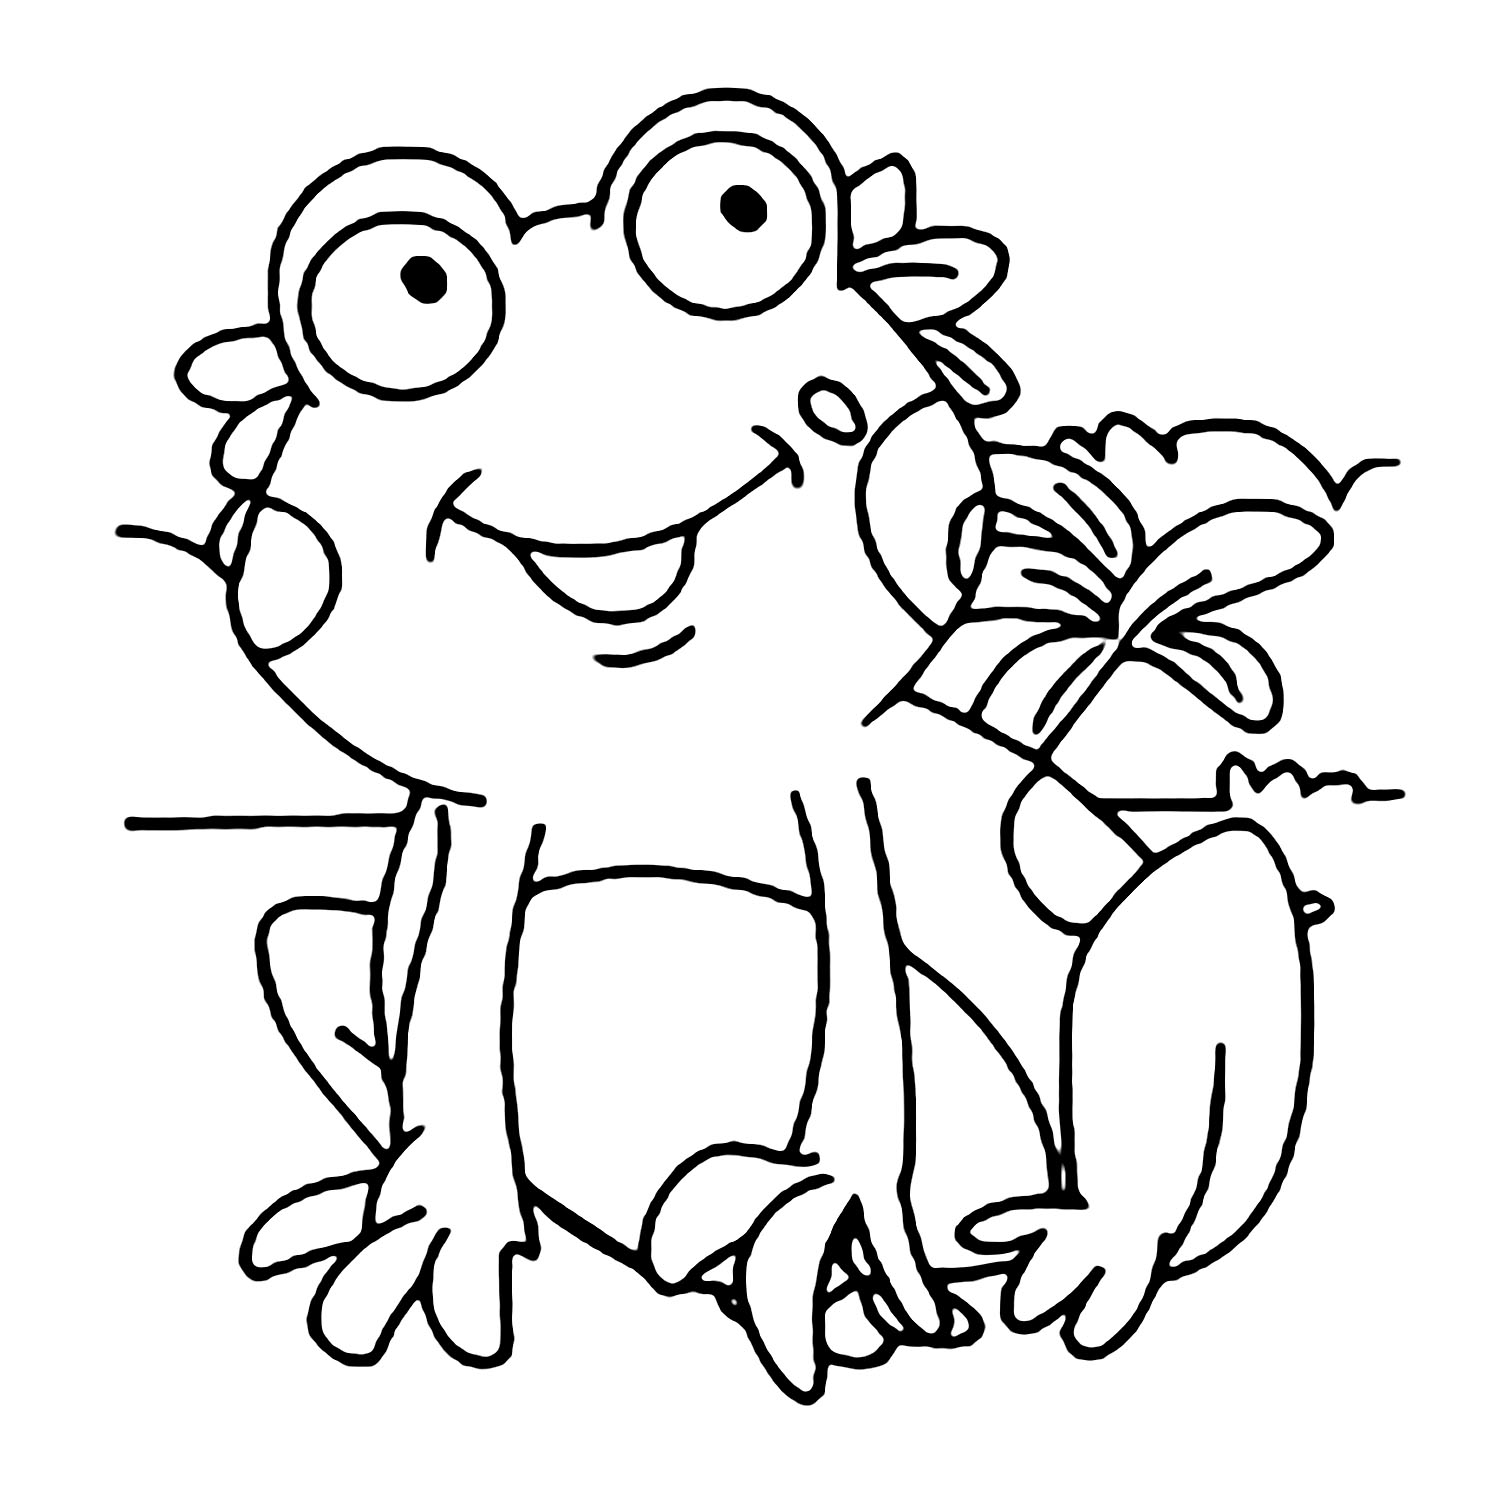 Simple Garfield coloring pages for kids